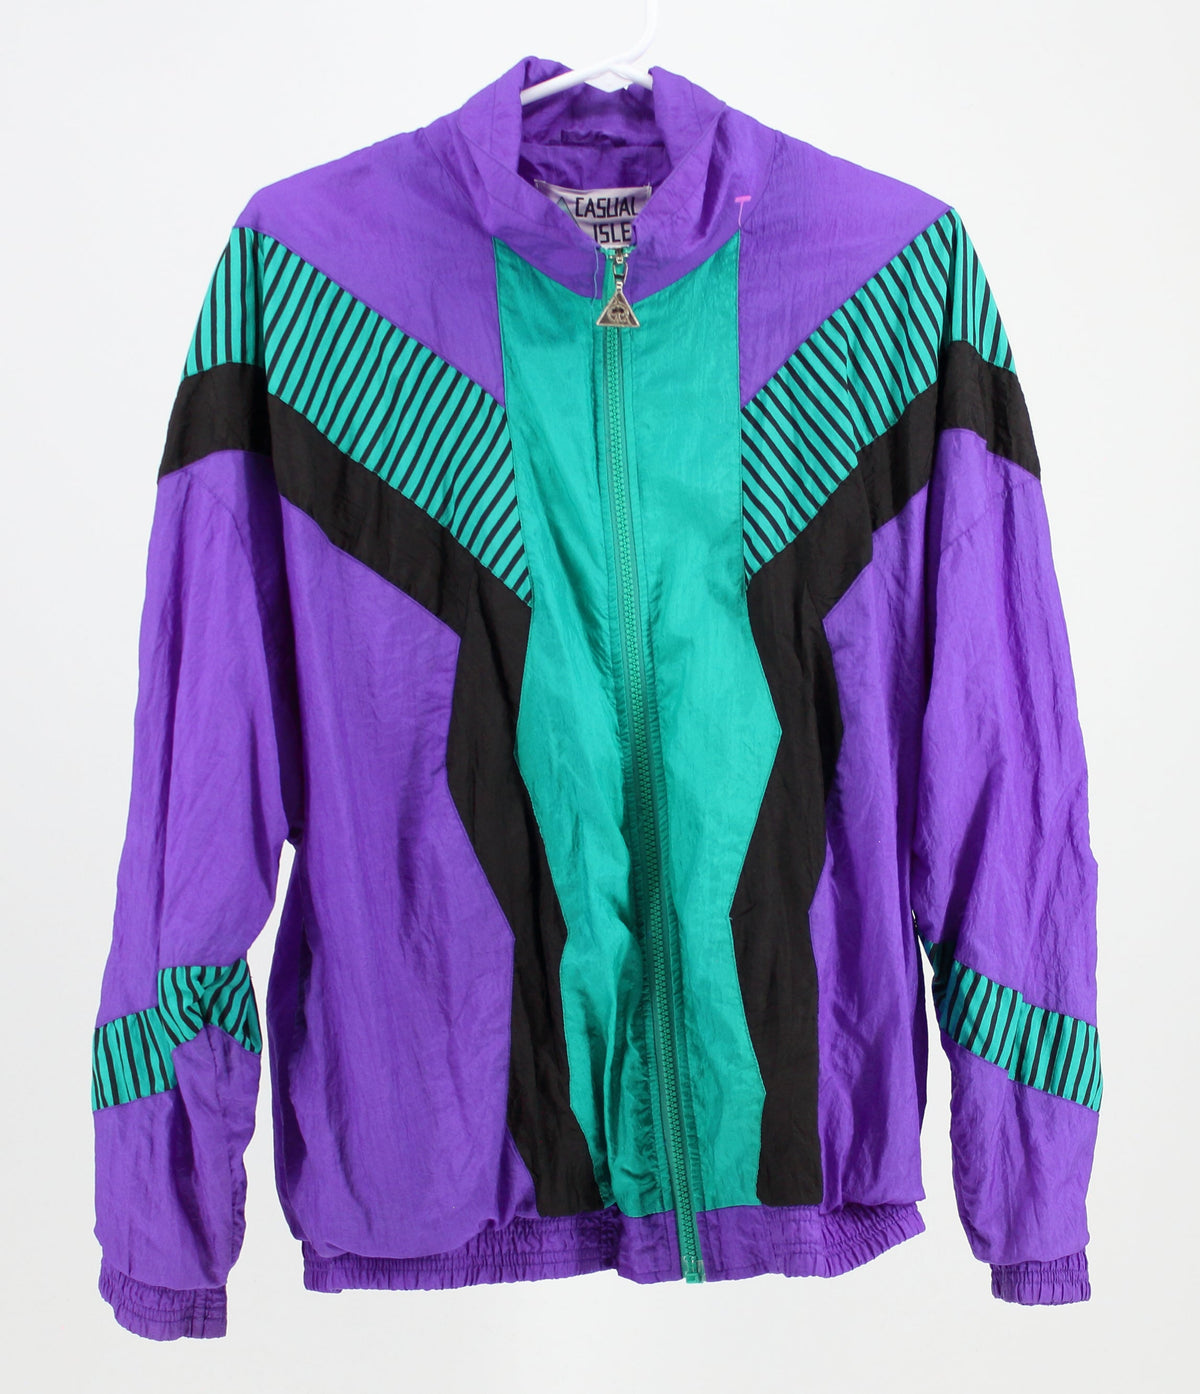 Casual Isle Patterned Windbreaker with Zip Up Front